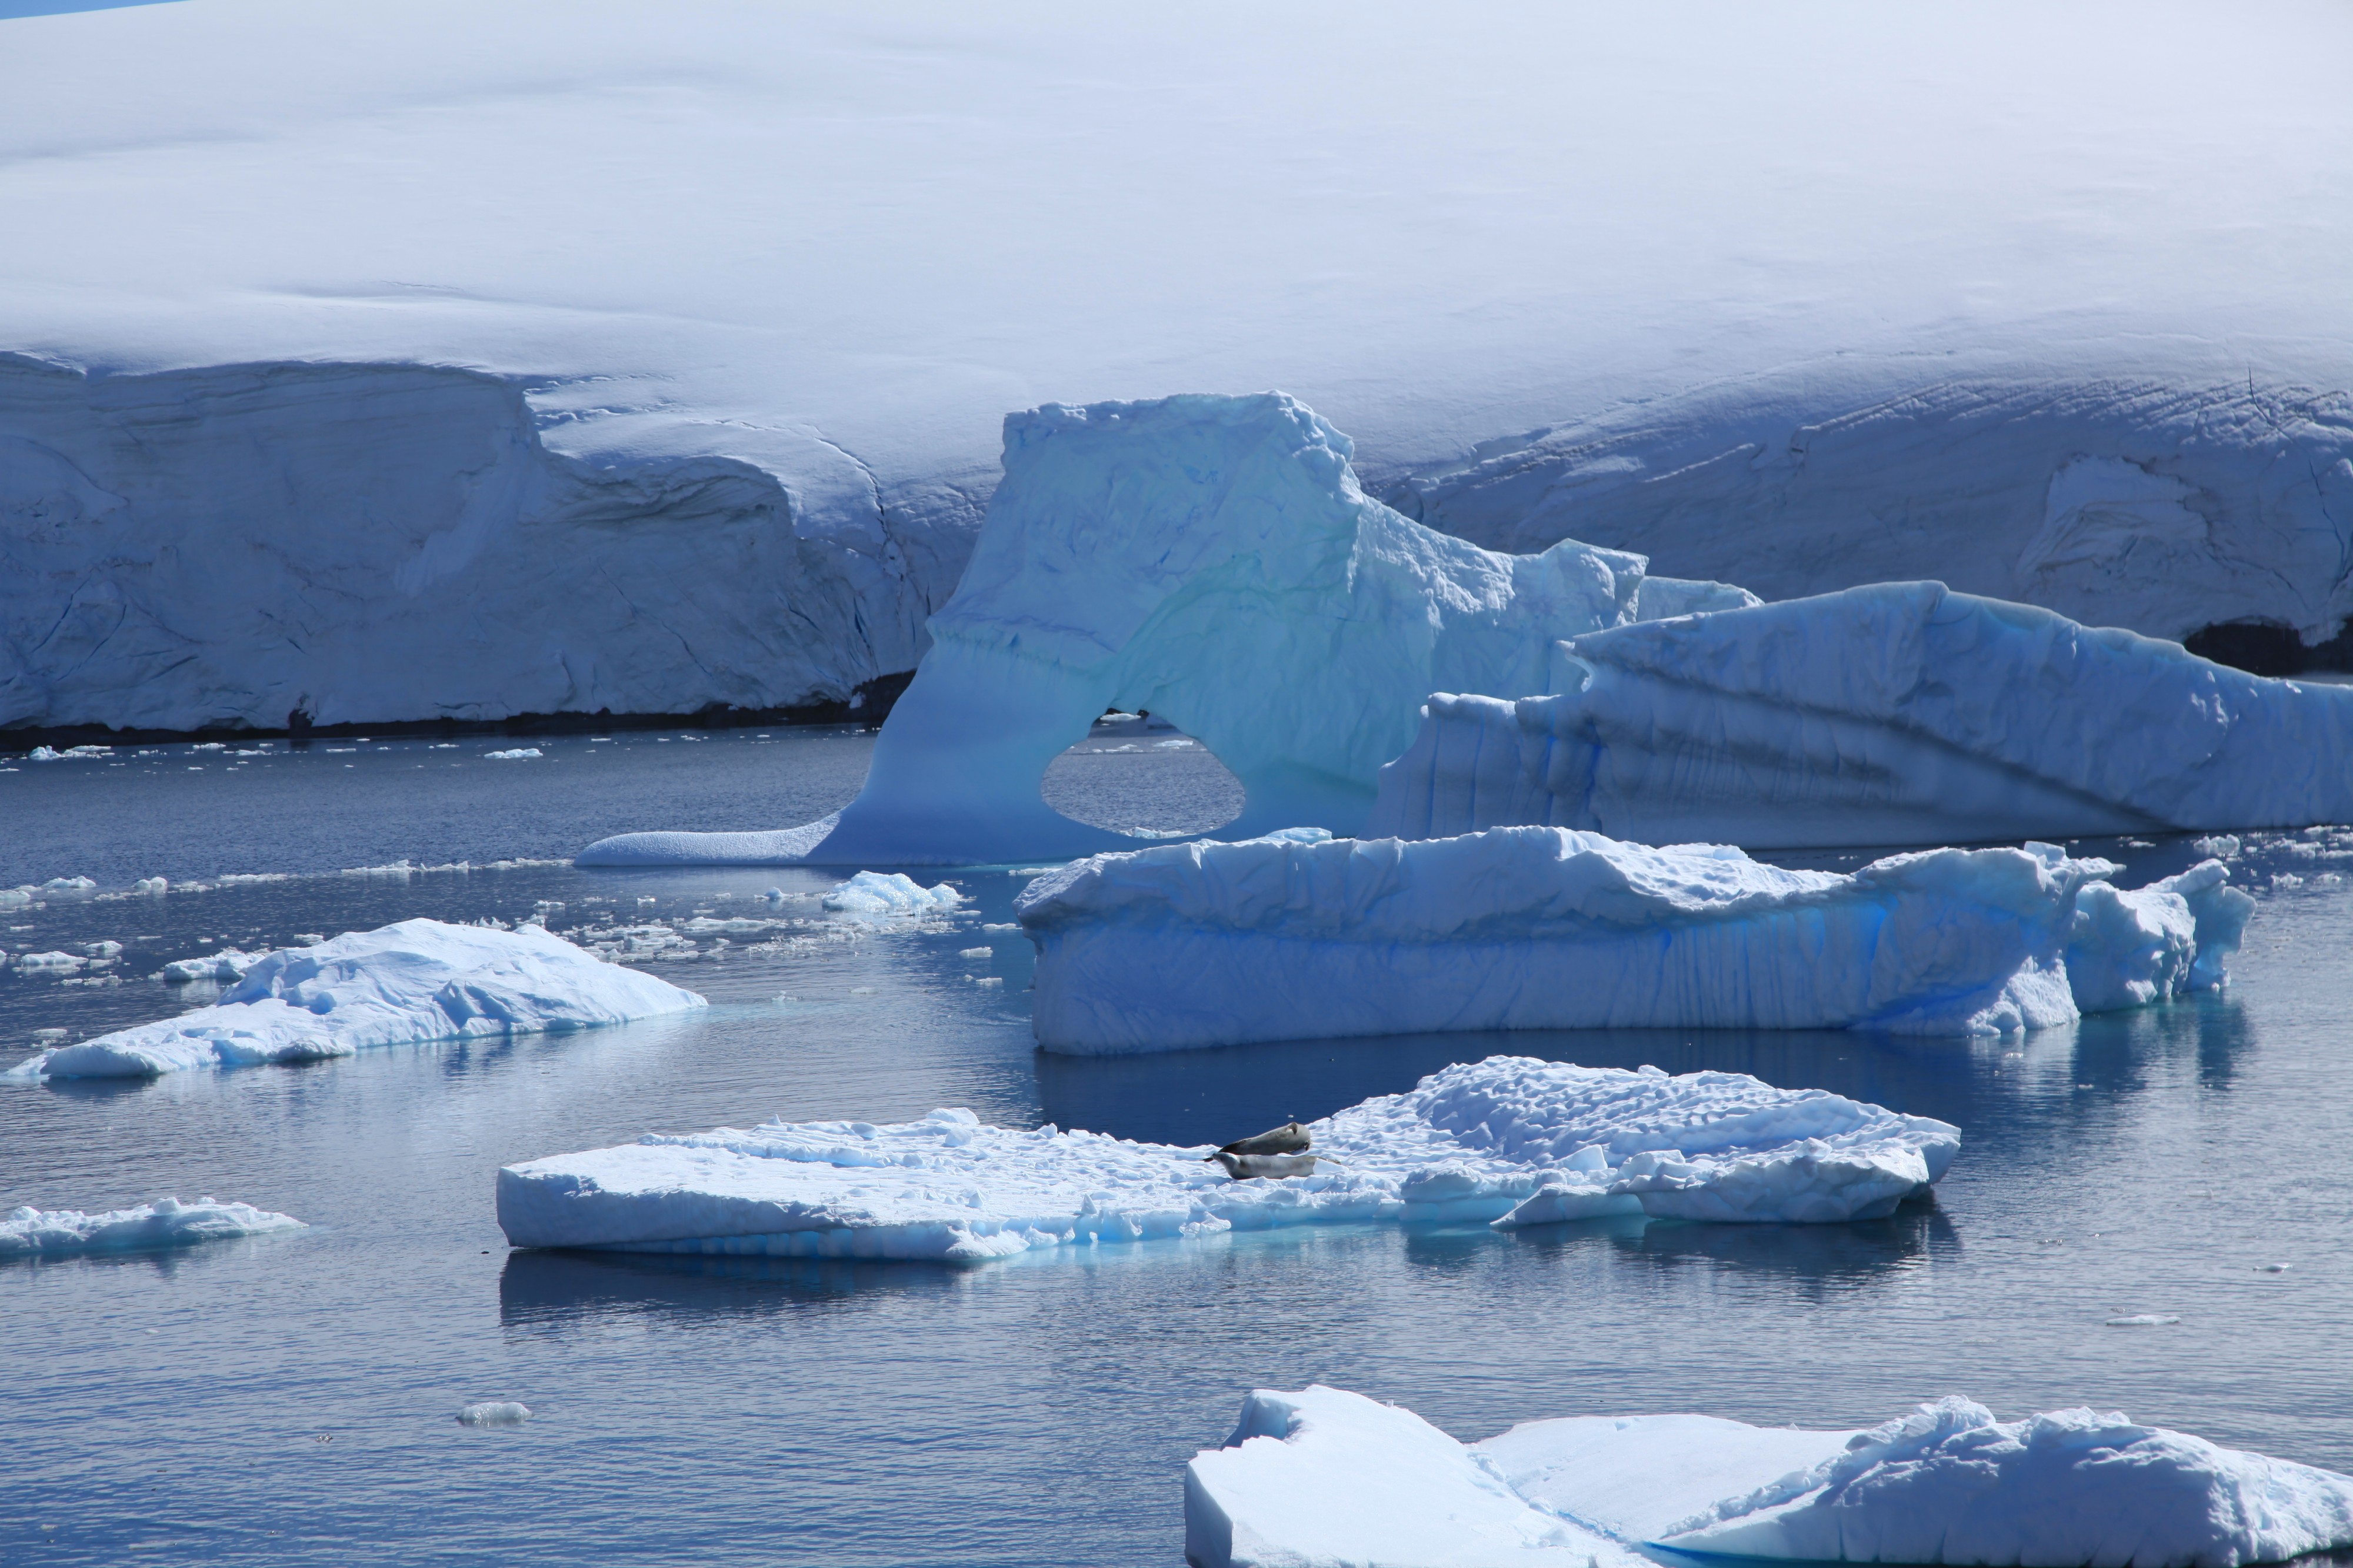 Icebergs in the Lemaire Channel, Antarctica (6062792092)